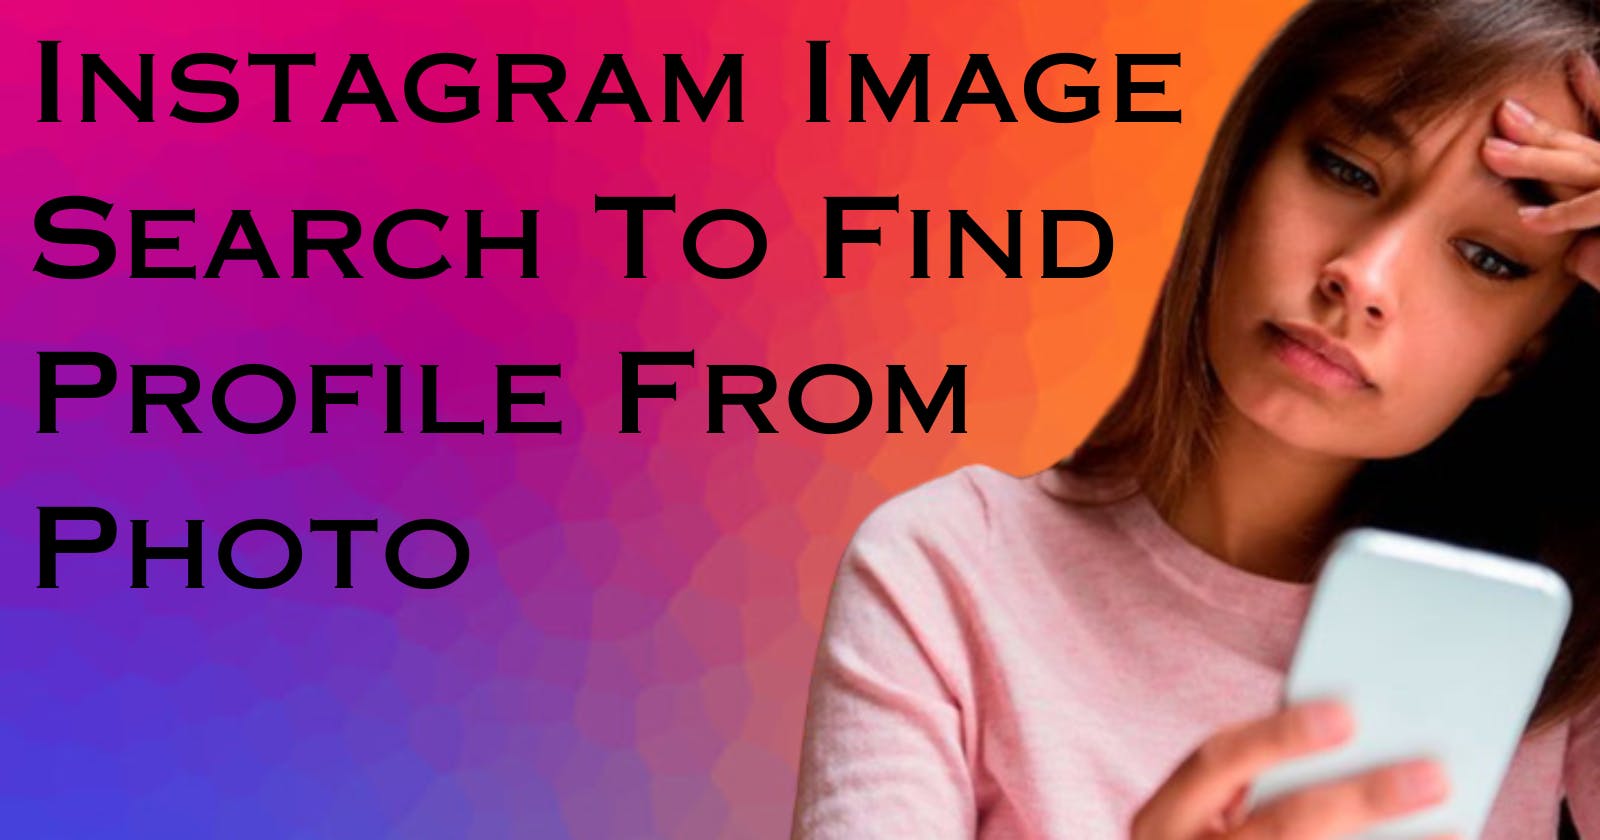 Instagram Image Search To Find Profile From Photo